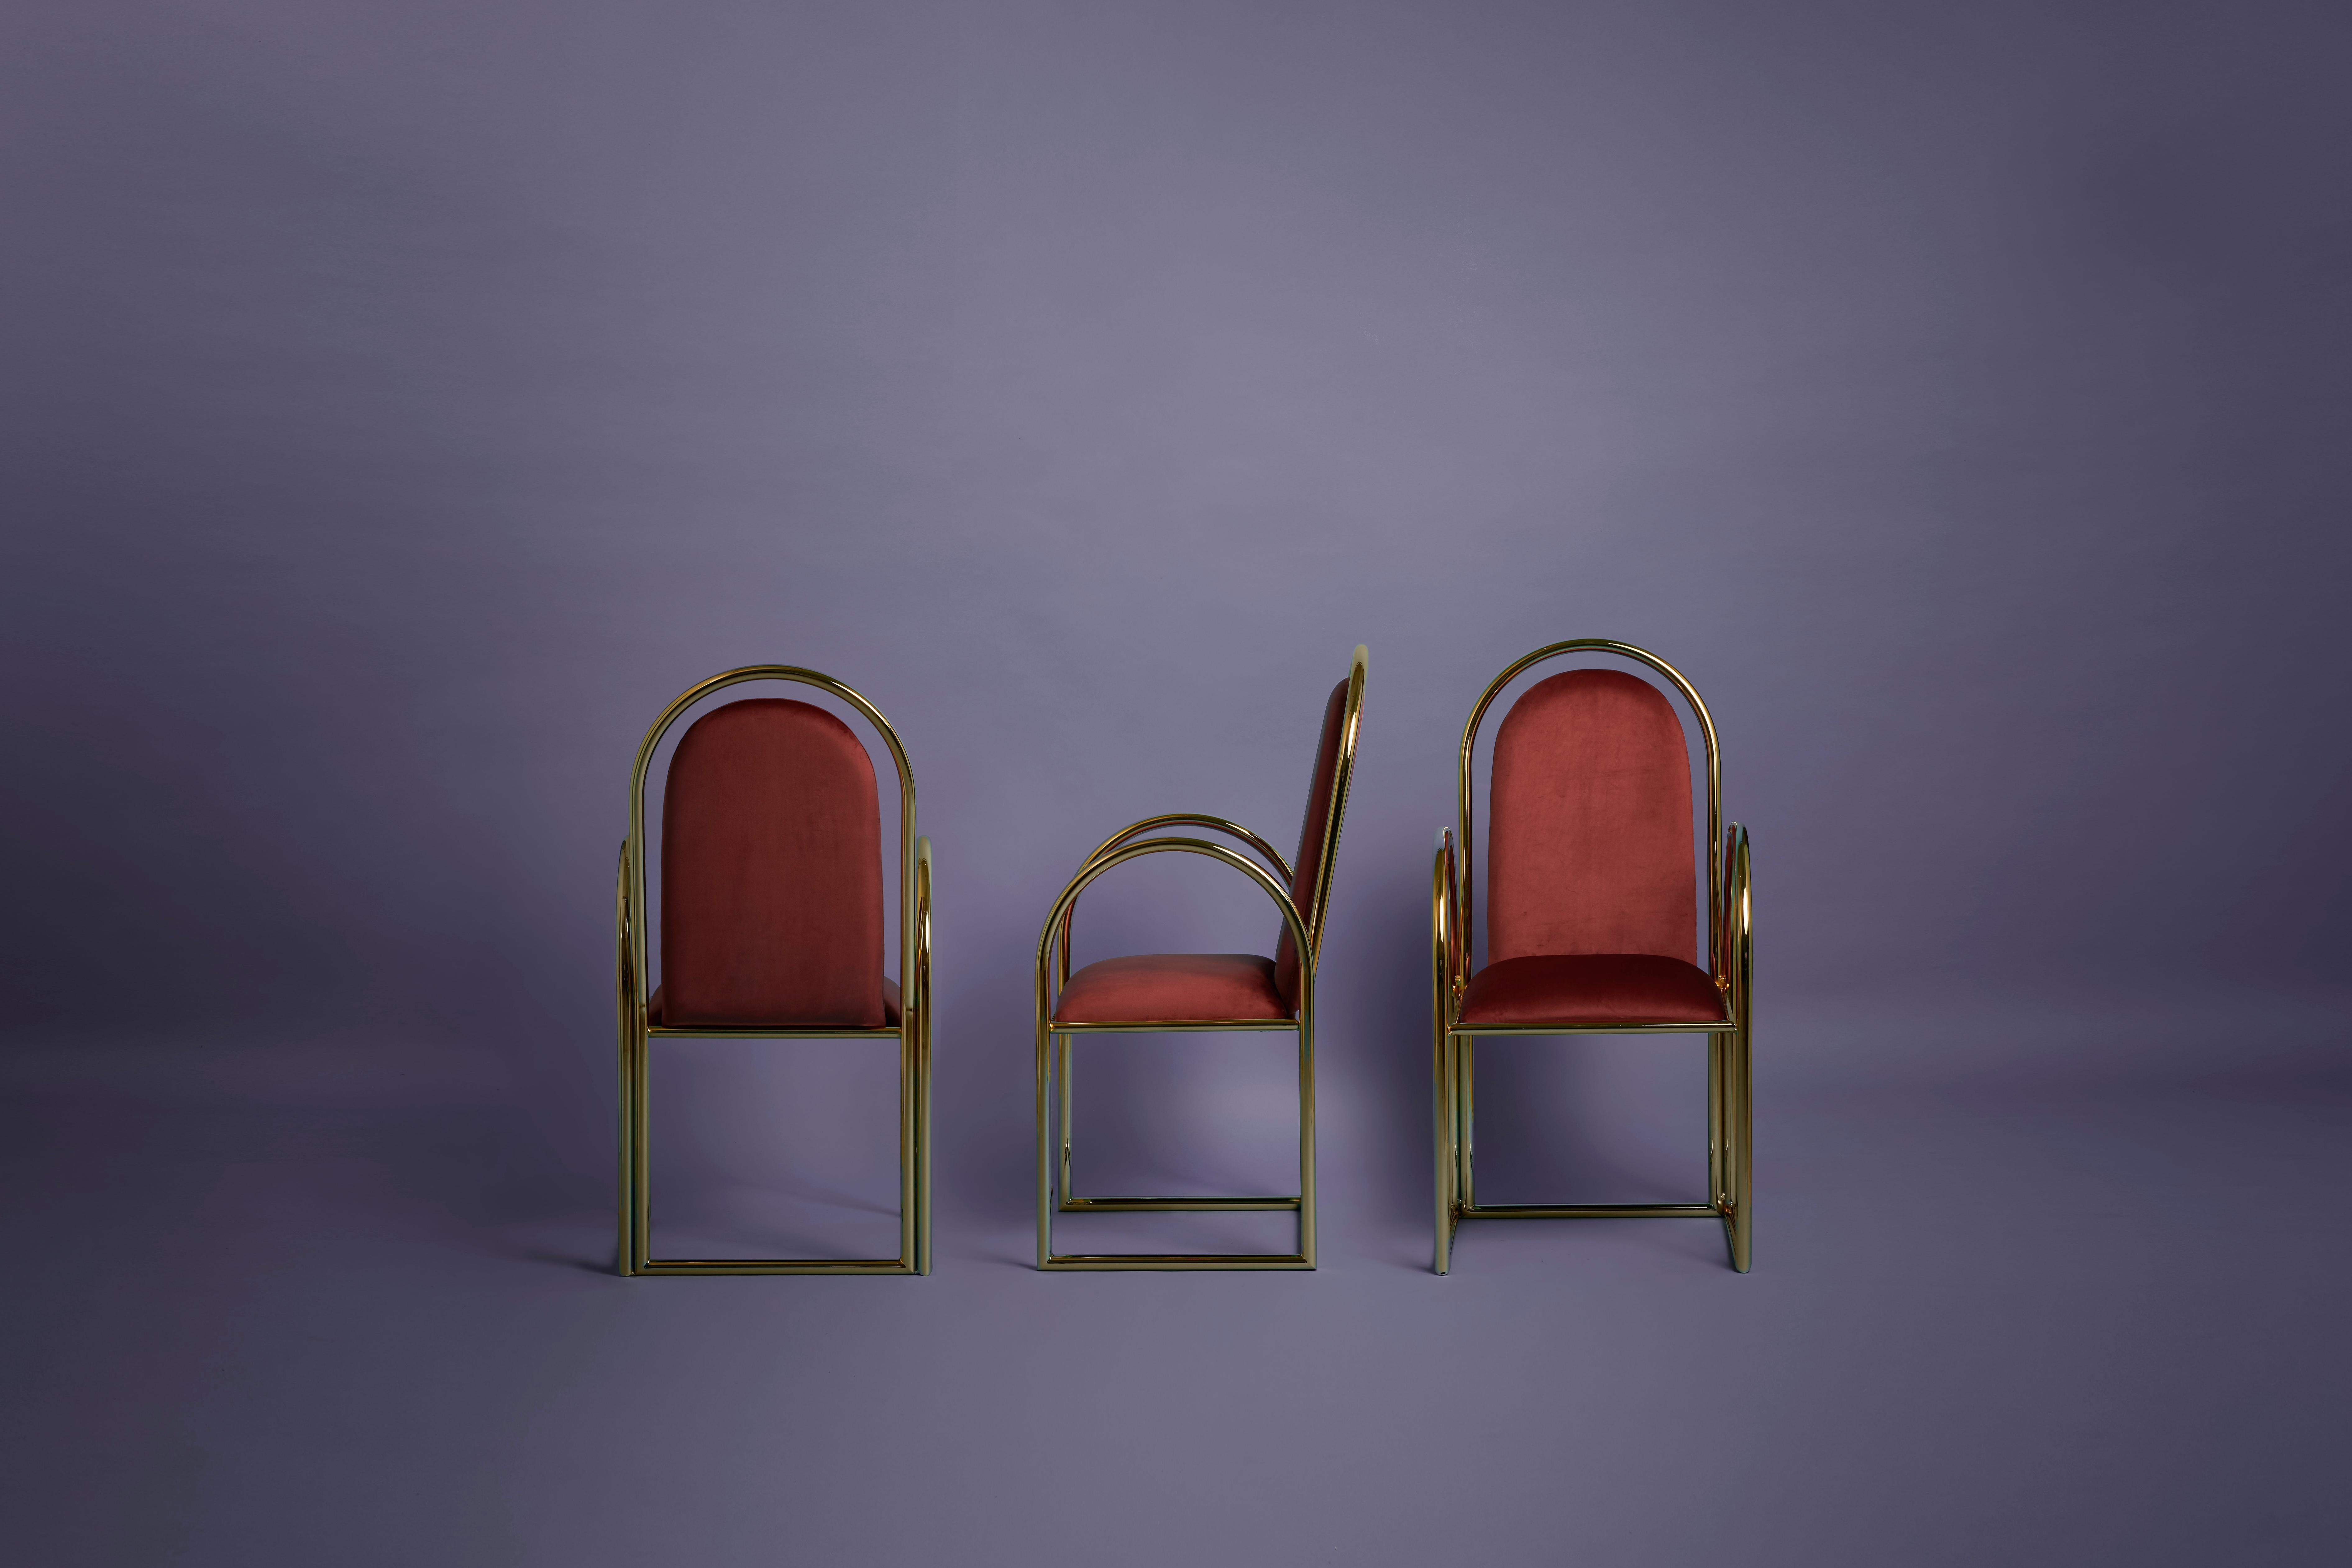 Set of 3 Arco Chair by Houtique
Materials: Metallic structure bathed in 24 Ct gold // epoxy paint
 Upholstery Velvet
Dimensions: 47 x 45 x H 100 cm
 Seat height: 46 cm

Chairs, tables and stools with fun shapes inspired in the 80’s.

Structure: 25mm